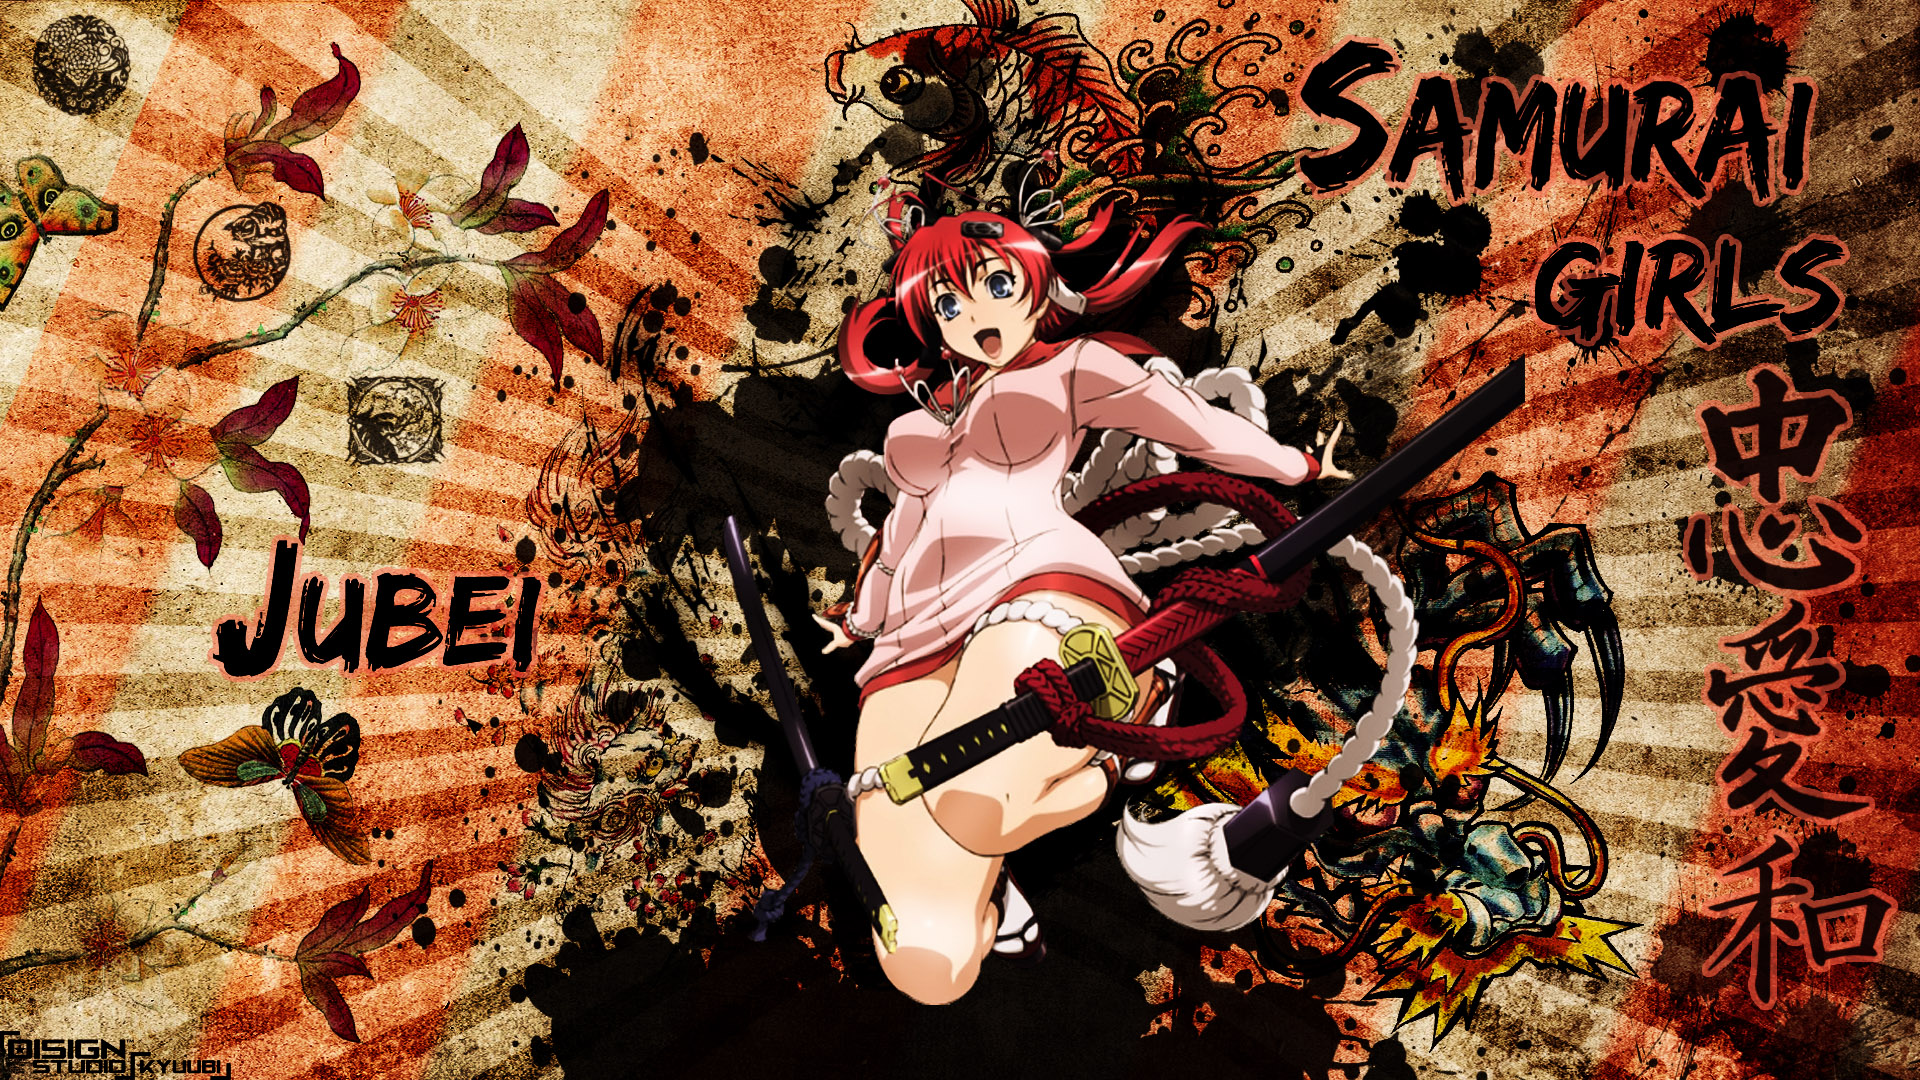 Artist Action Anime Wallpaper By Various Designers